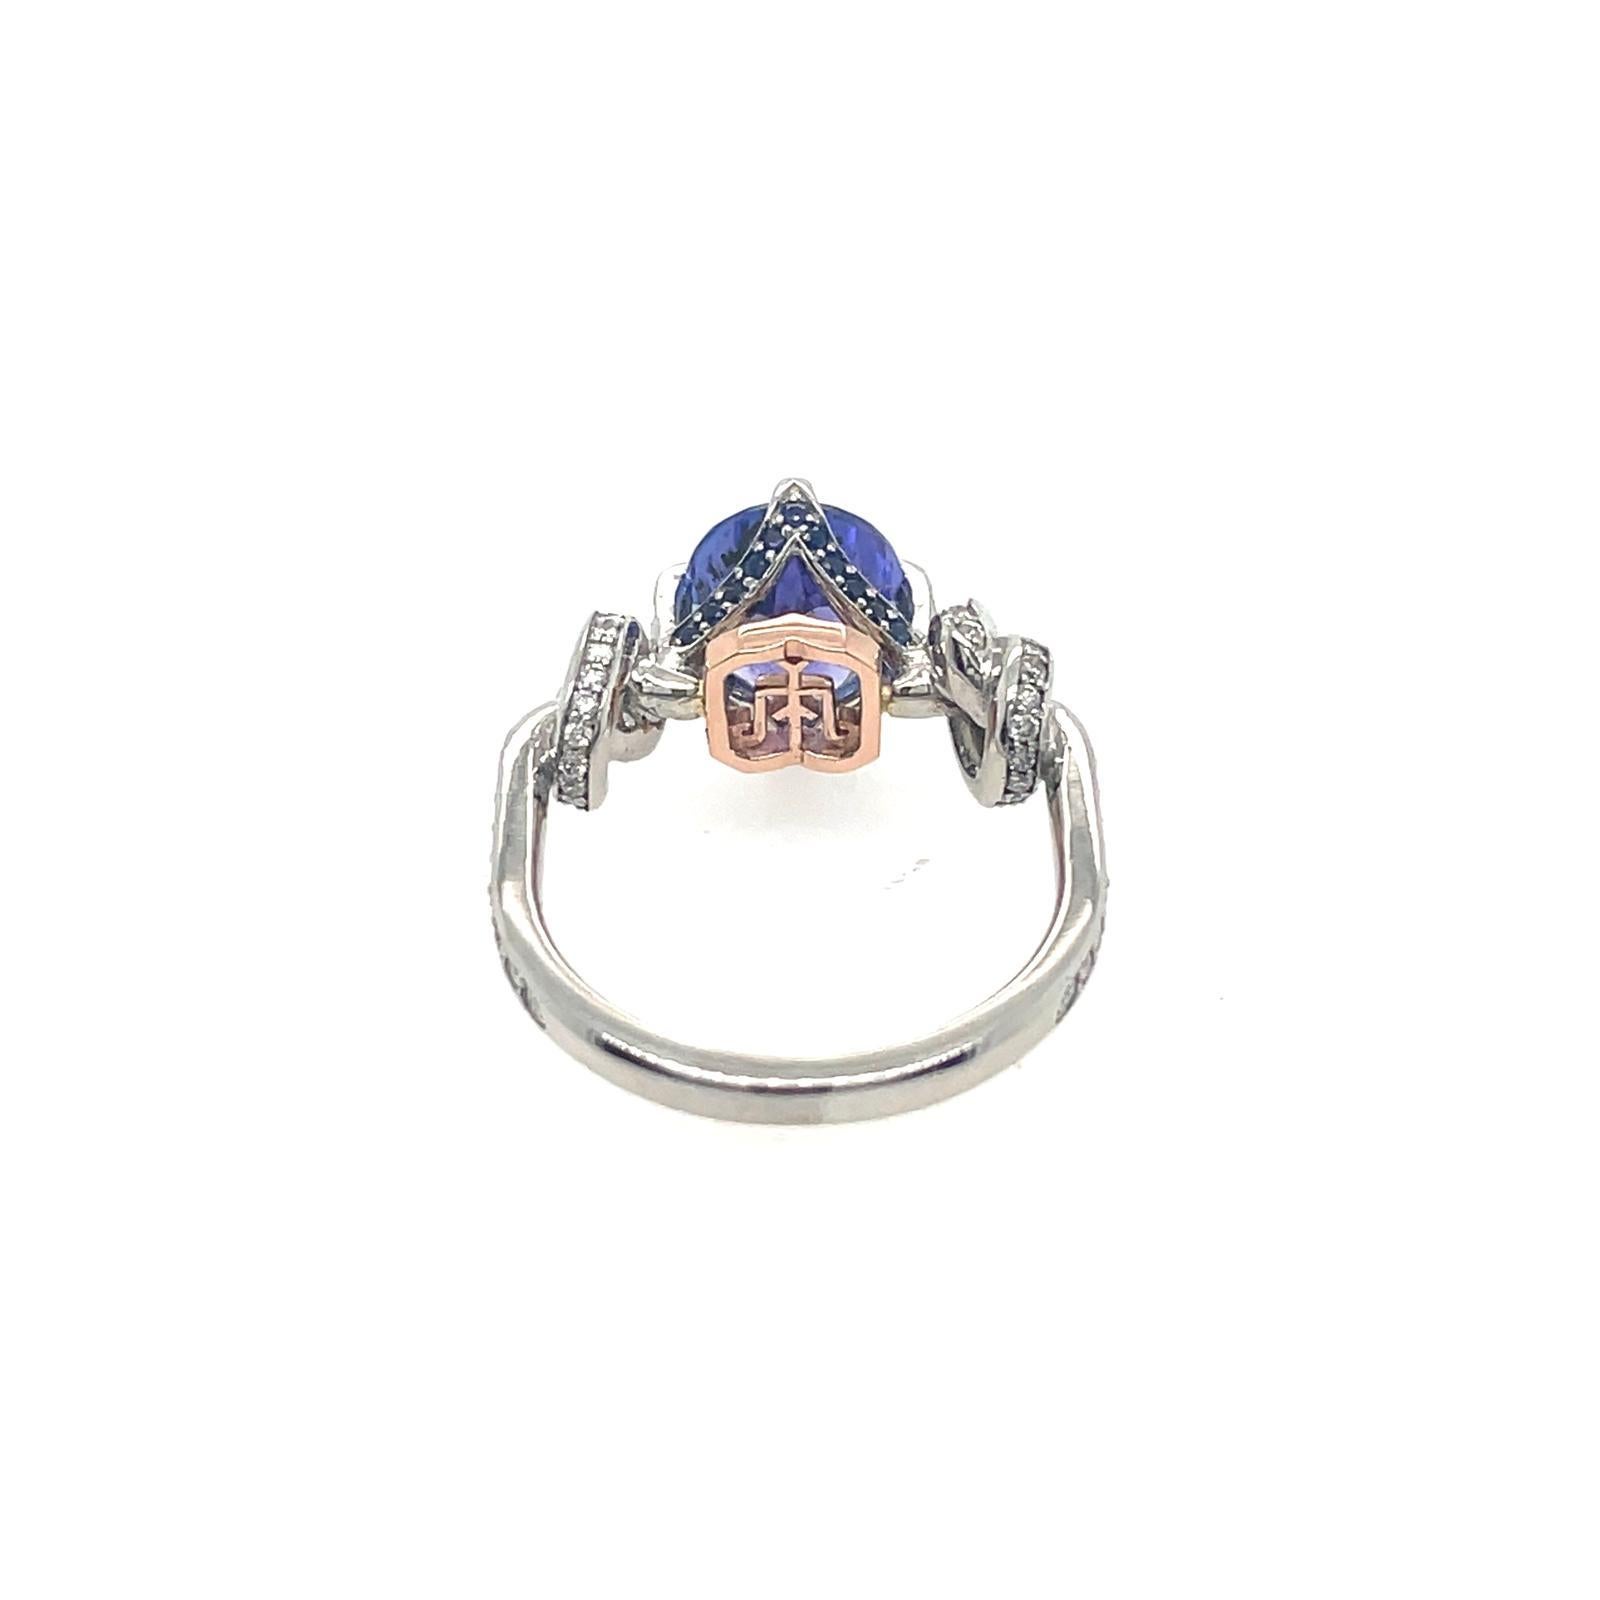 For Sale:  2ct tanzanite and diamond ring in platinum and rose gold  Forget me knot ring  6